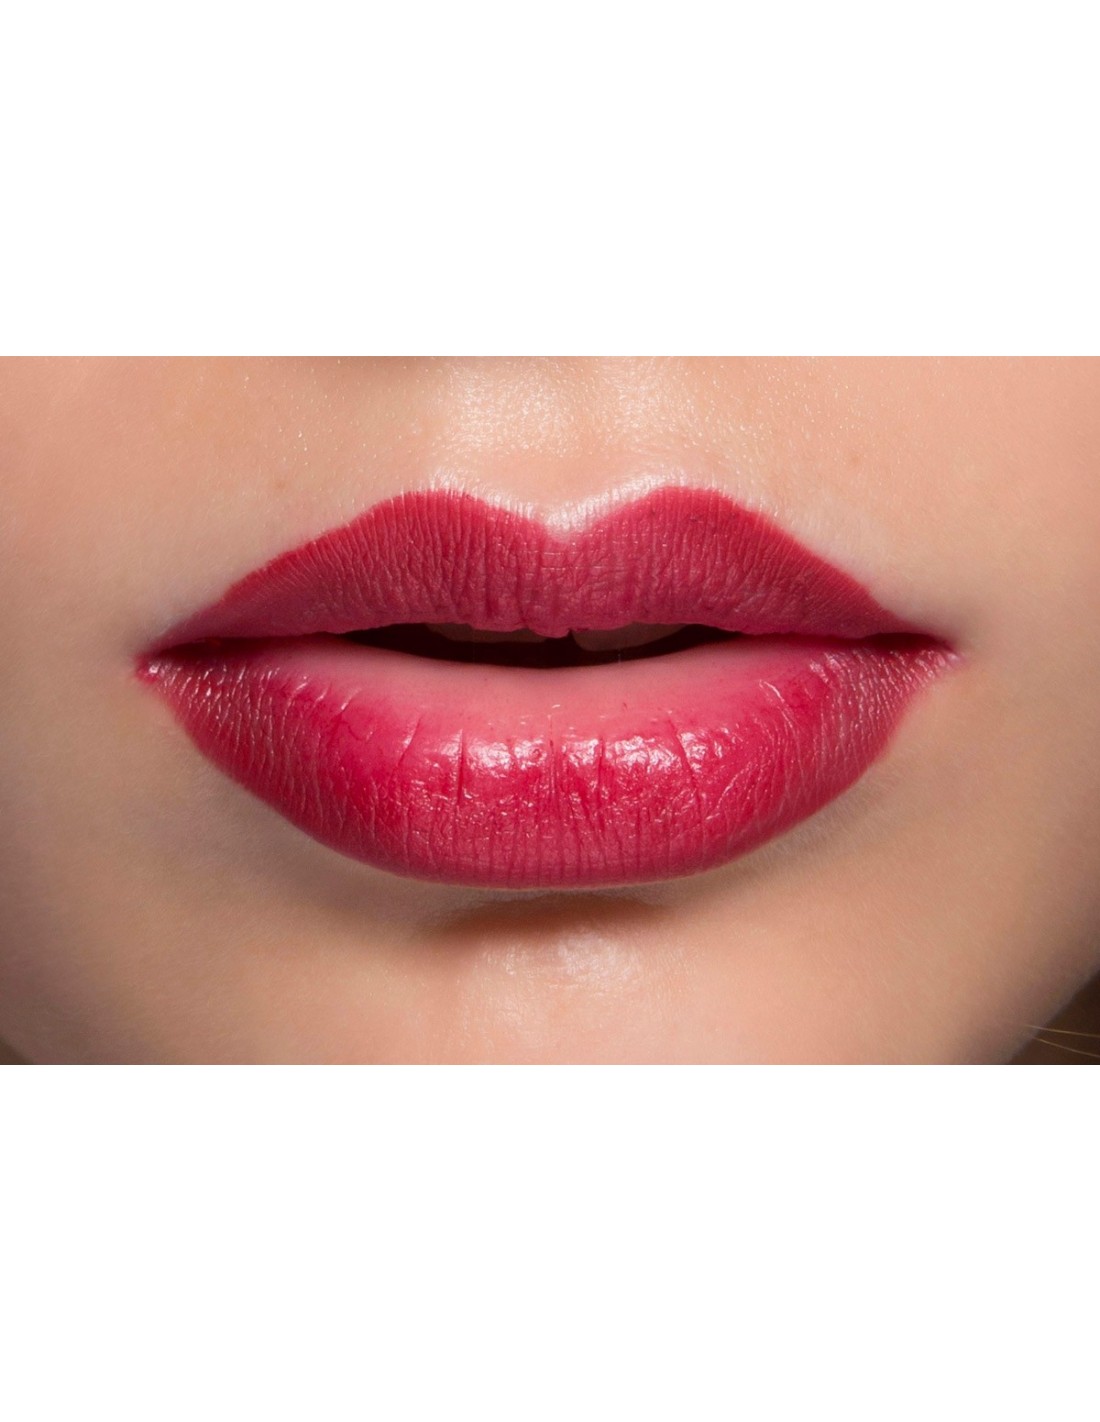 3D lips rejuvenation and volume in a single pass